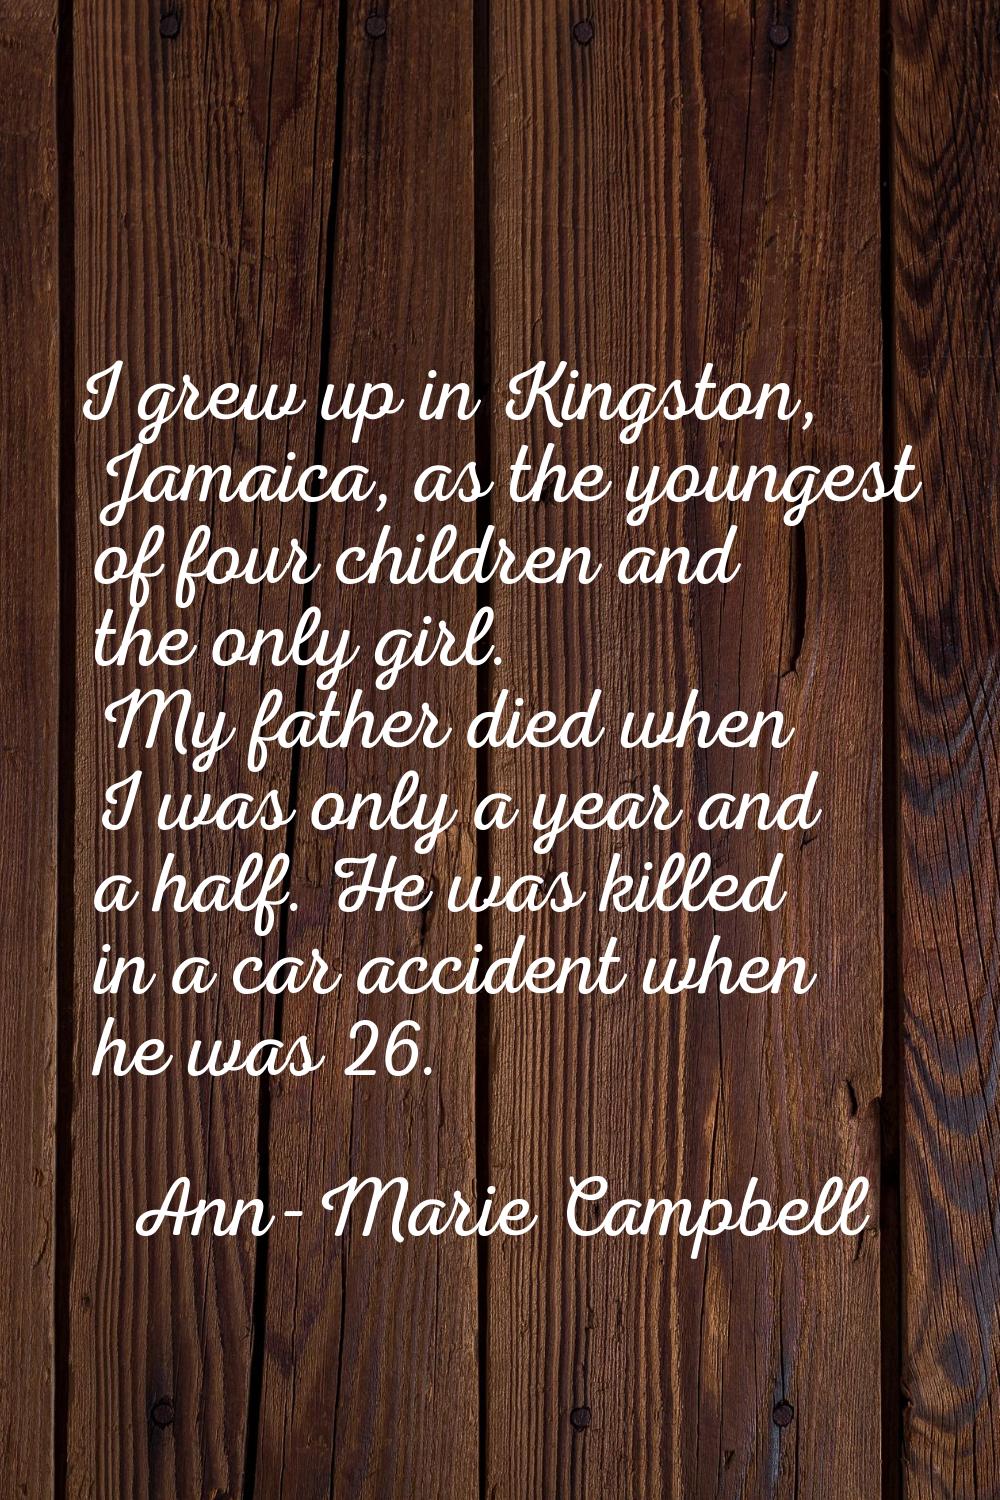 I grew up in Kingston, Jamaica, as the youngest of four children and the only girl. My father died 